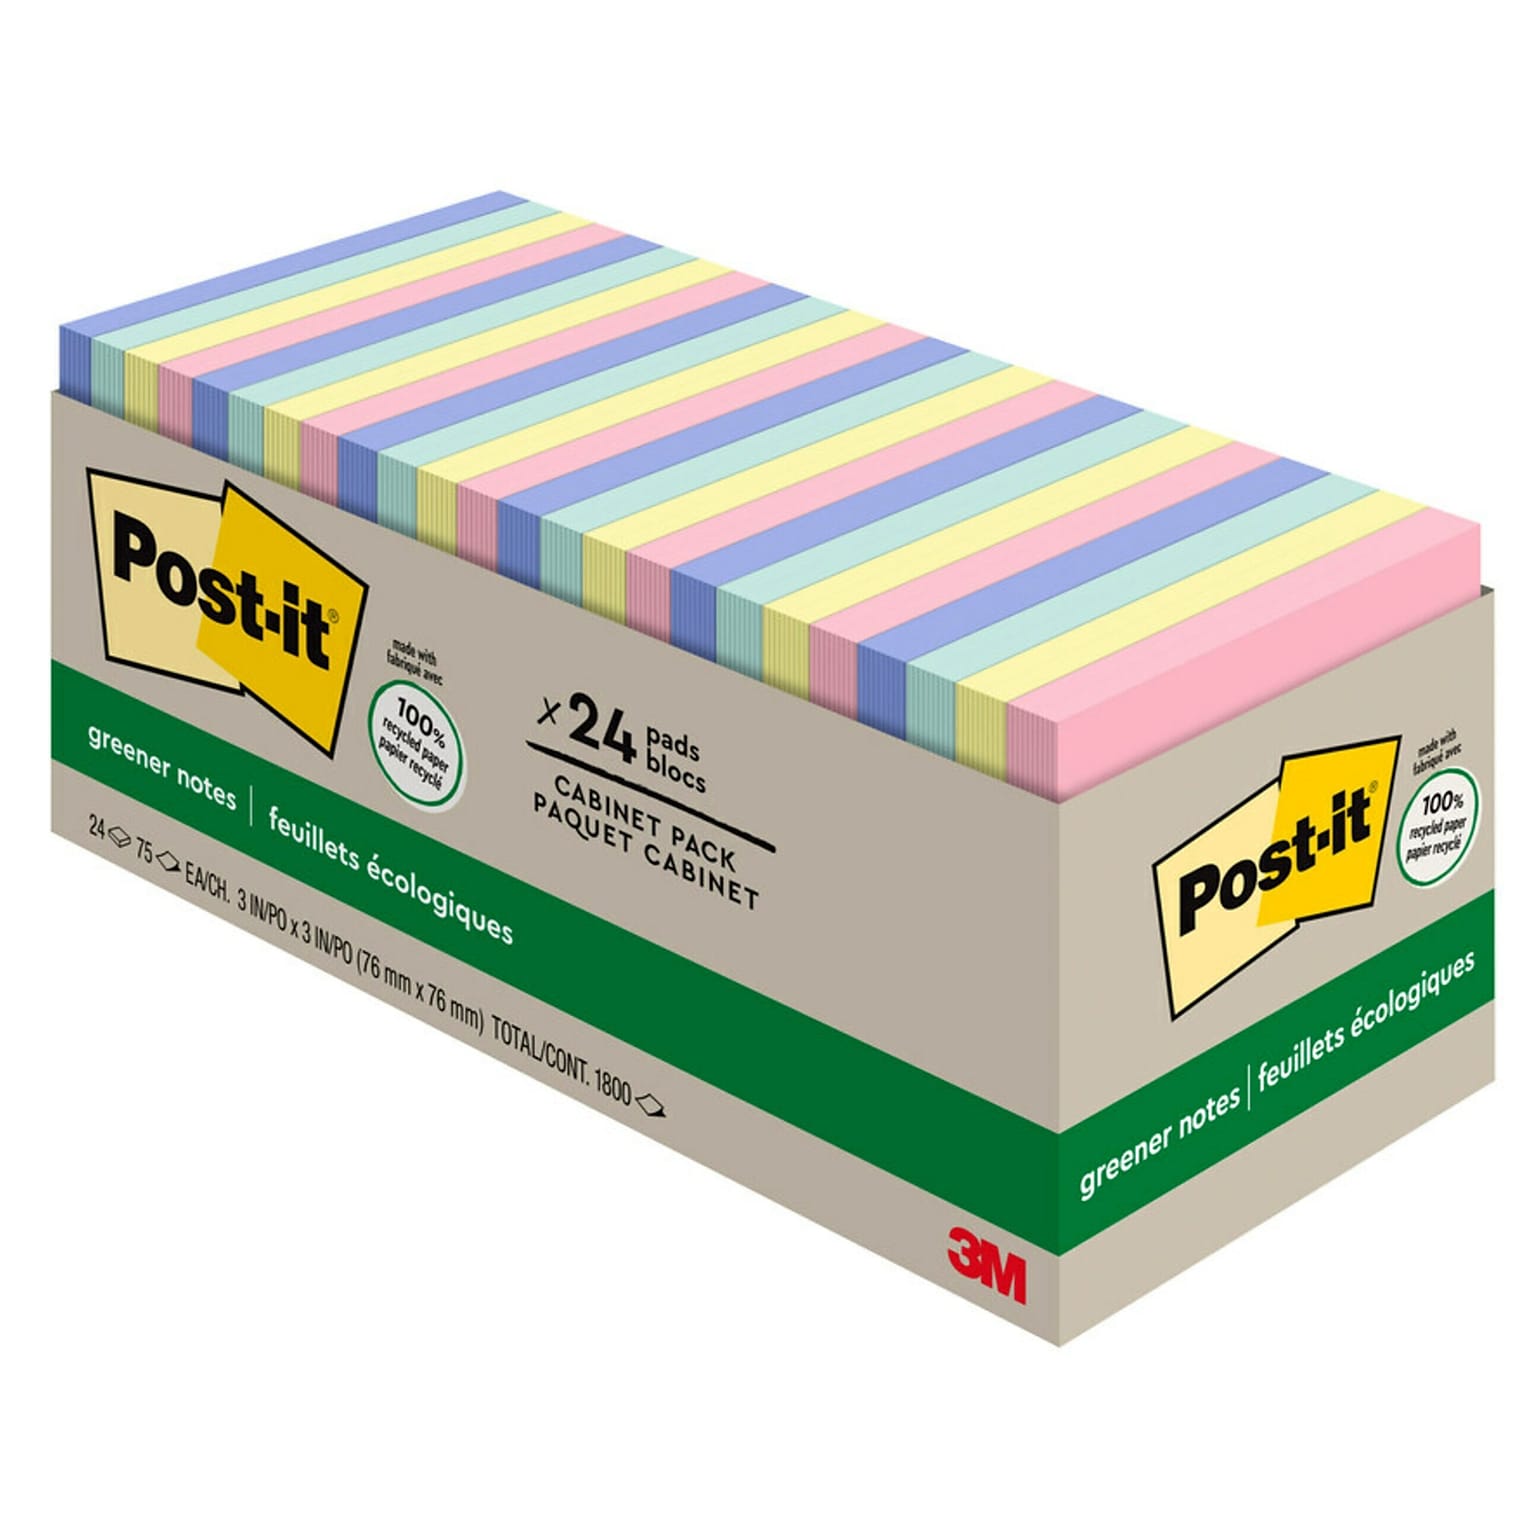 Post-it Greener Notes, 3 x 3 in., 24 Pads, 75 Sheets/Pad, The Original Post-it Note, Sweet Sprinkles Collection